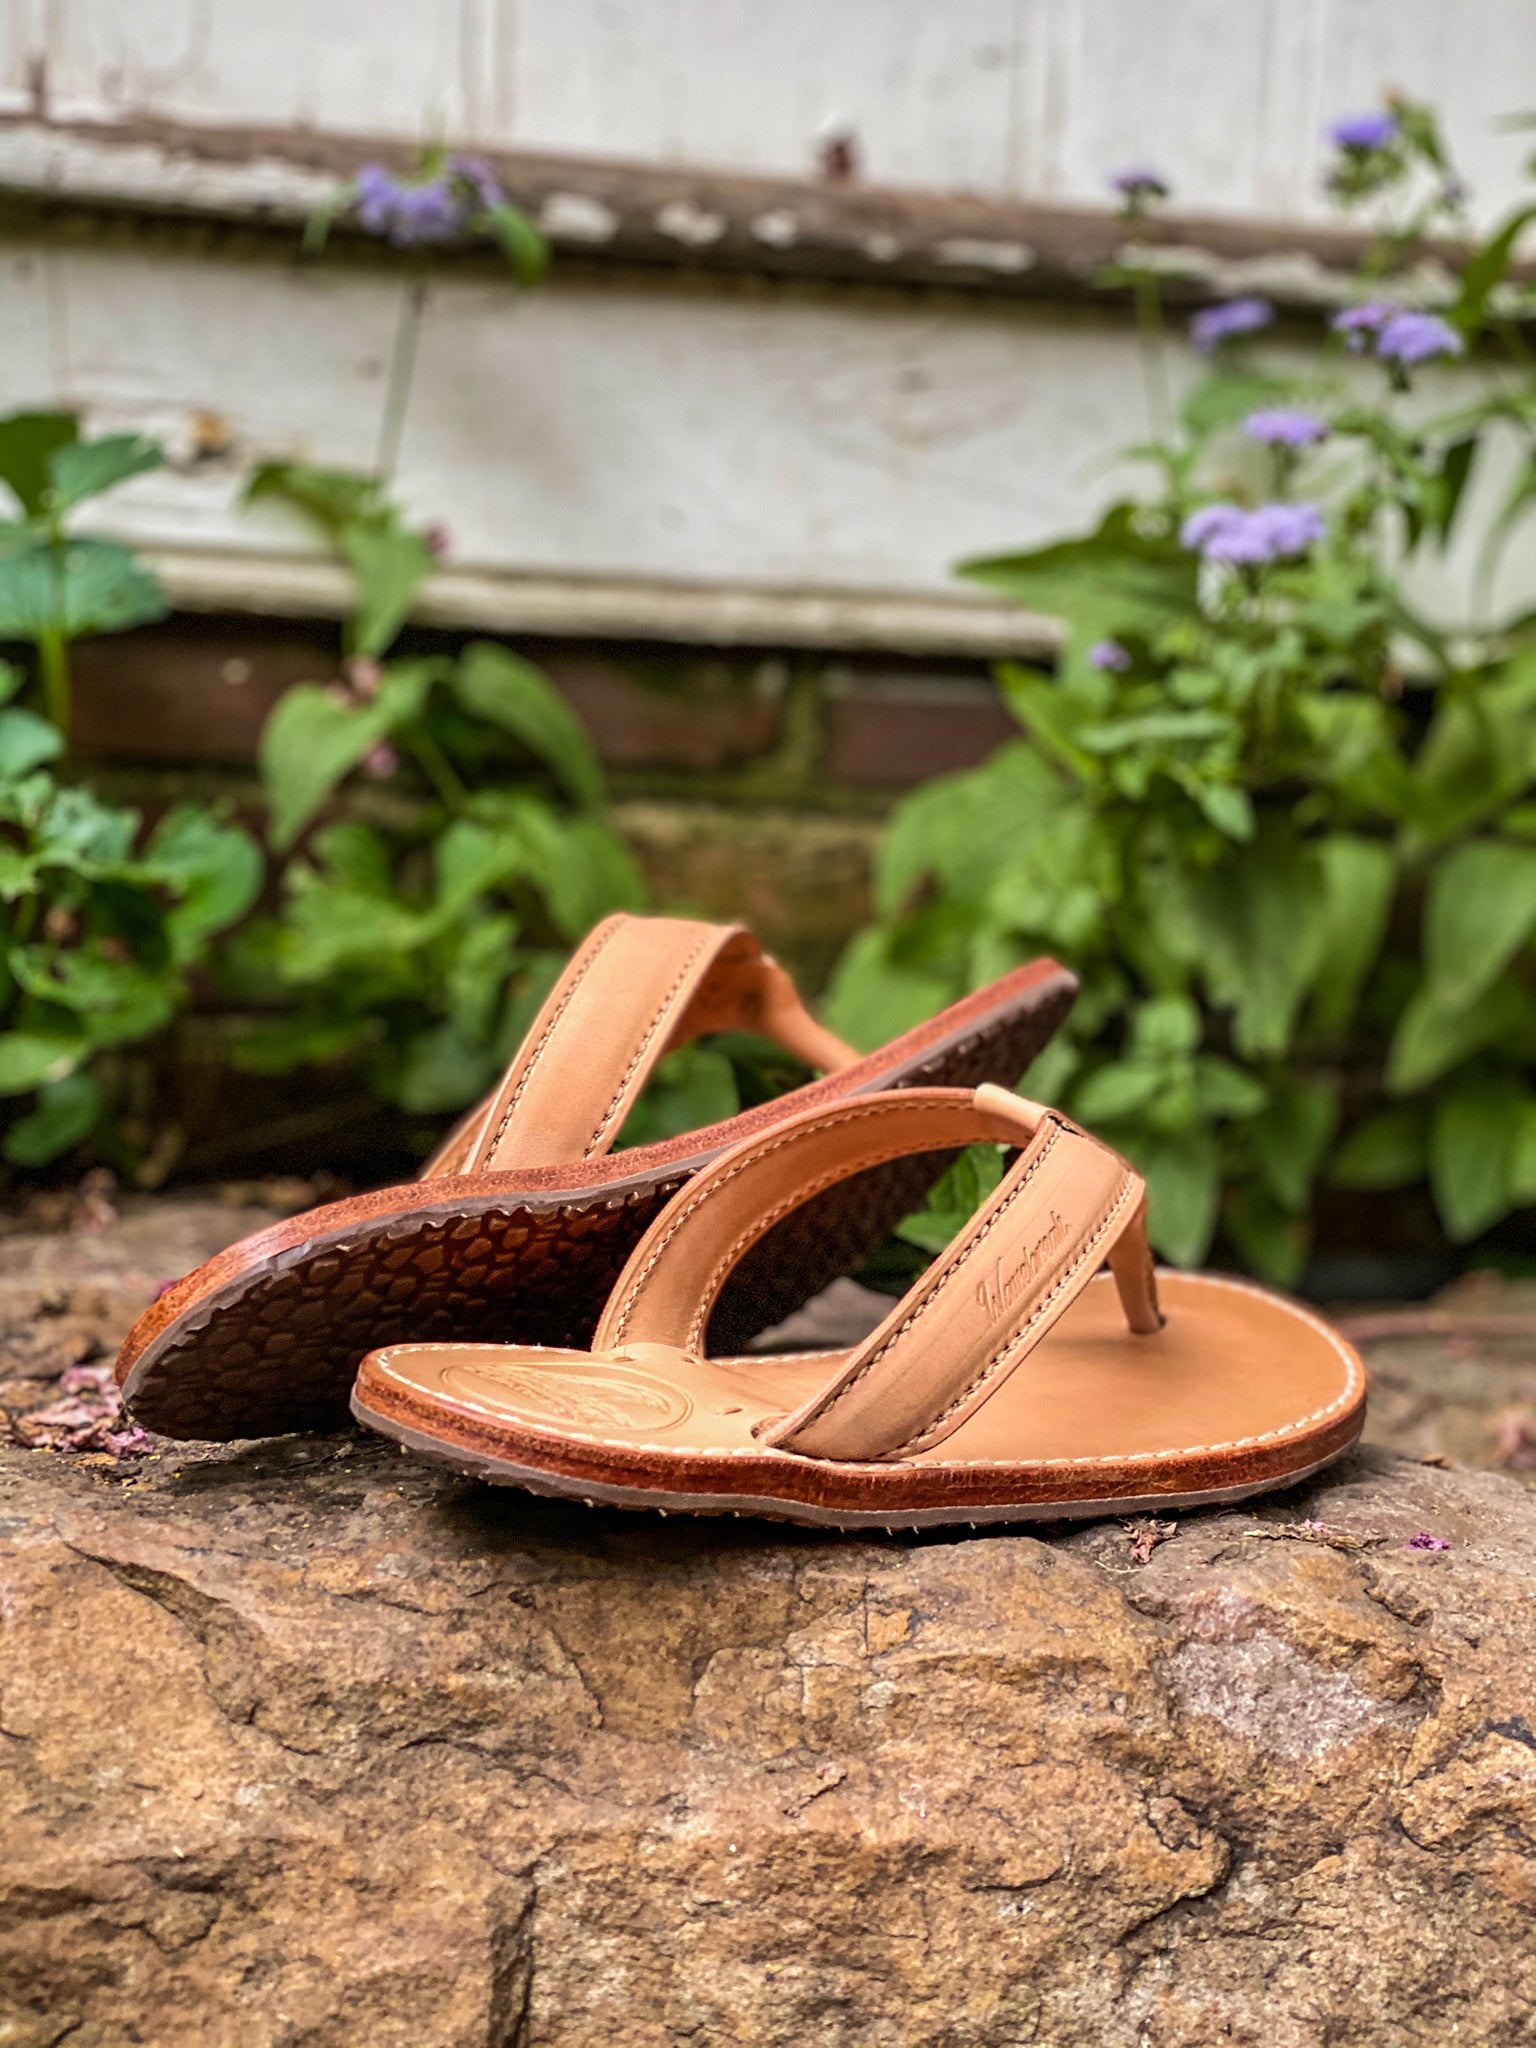 The Drifter - Rugged Handmade Leather Flip Flops for All